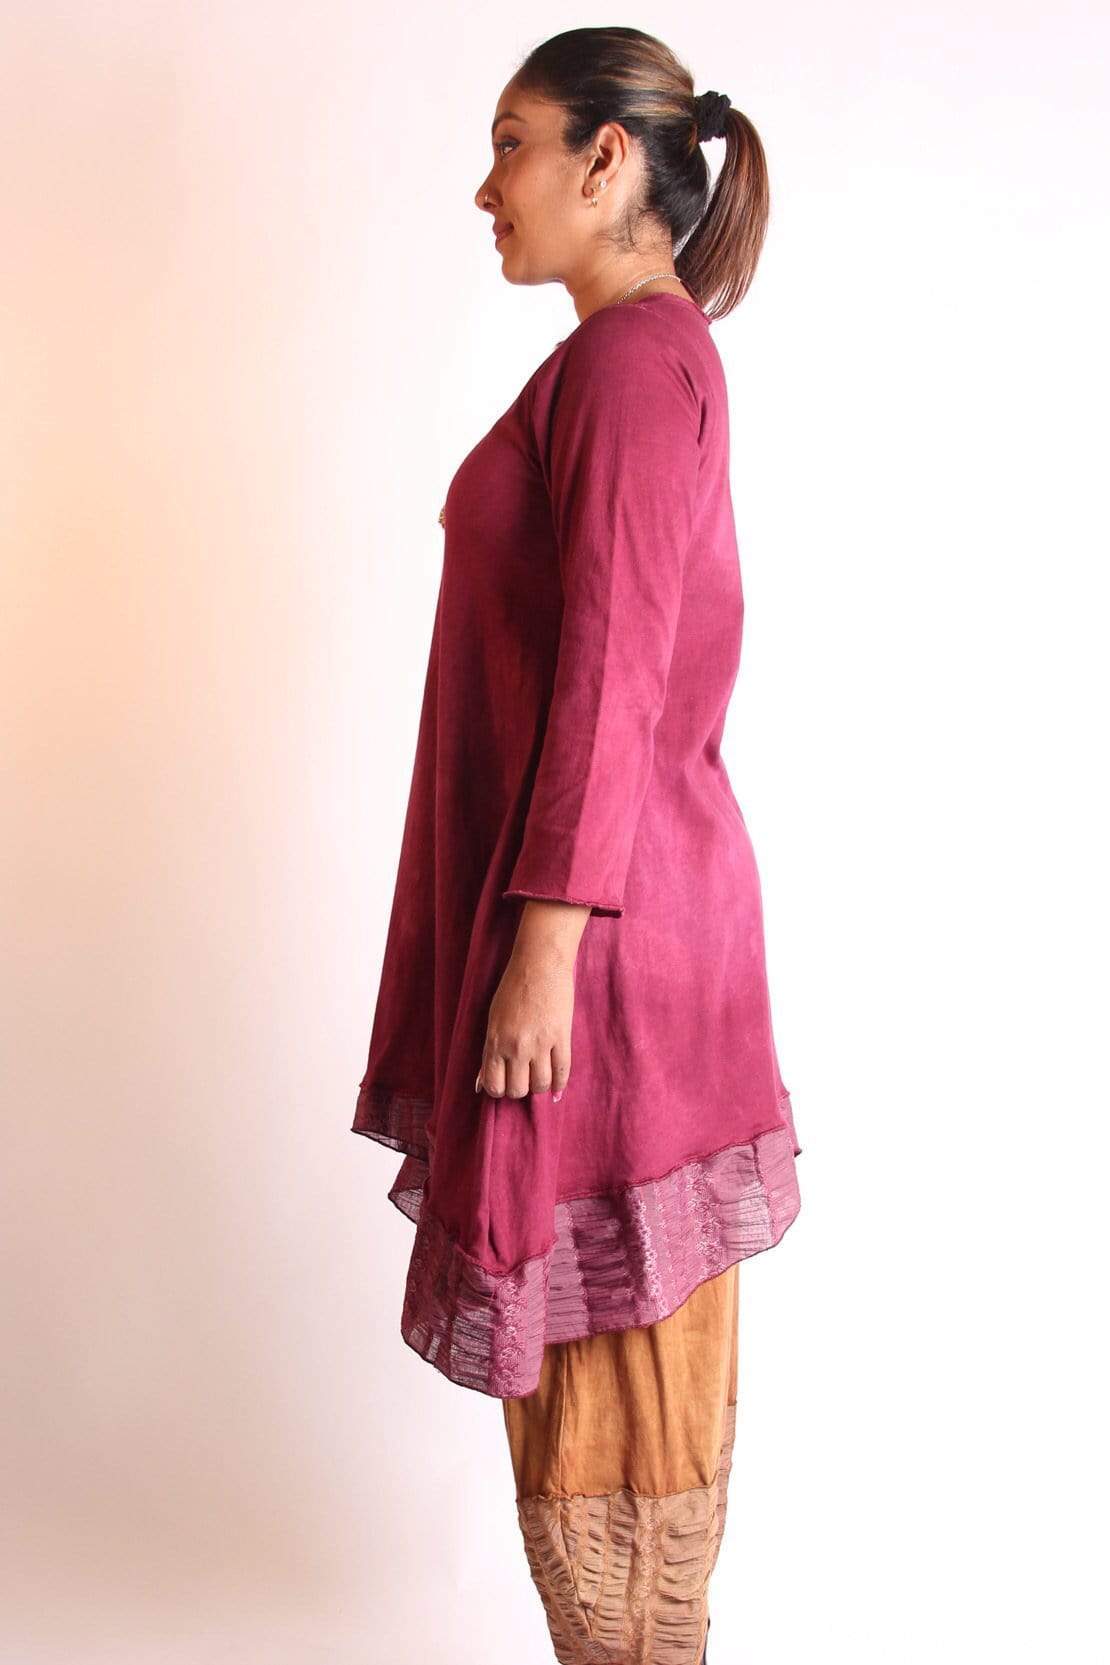 Steel Pony Dresses Brielle Cotton Knit Tunic on the Rack